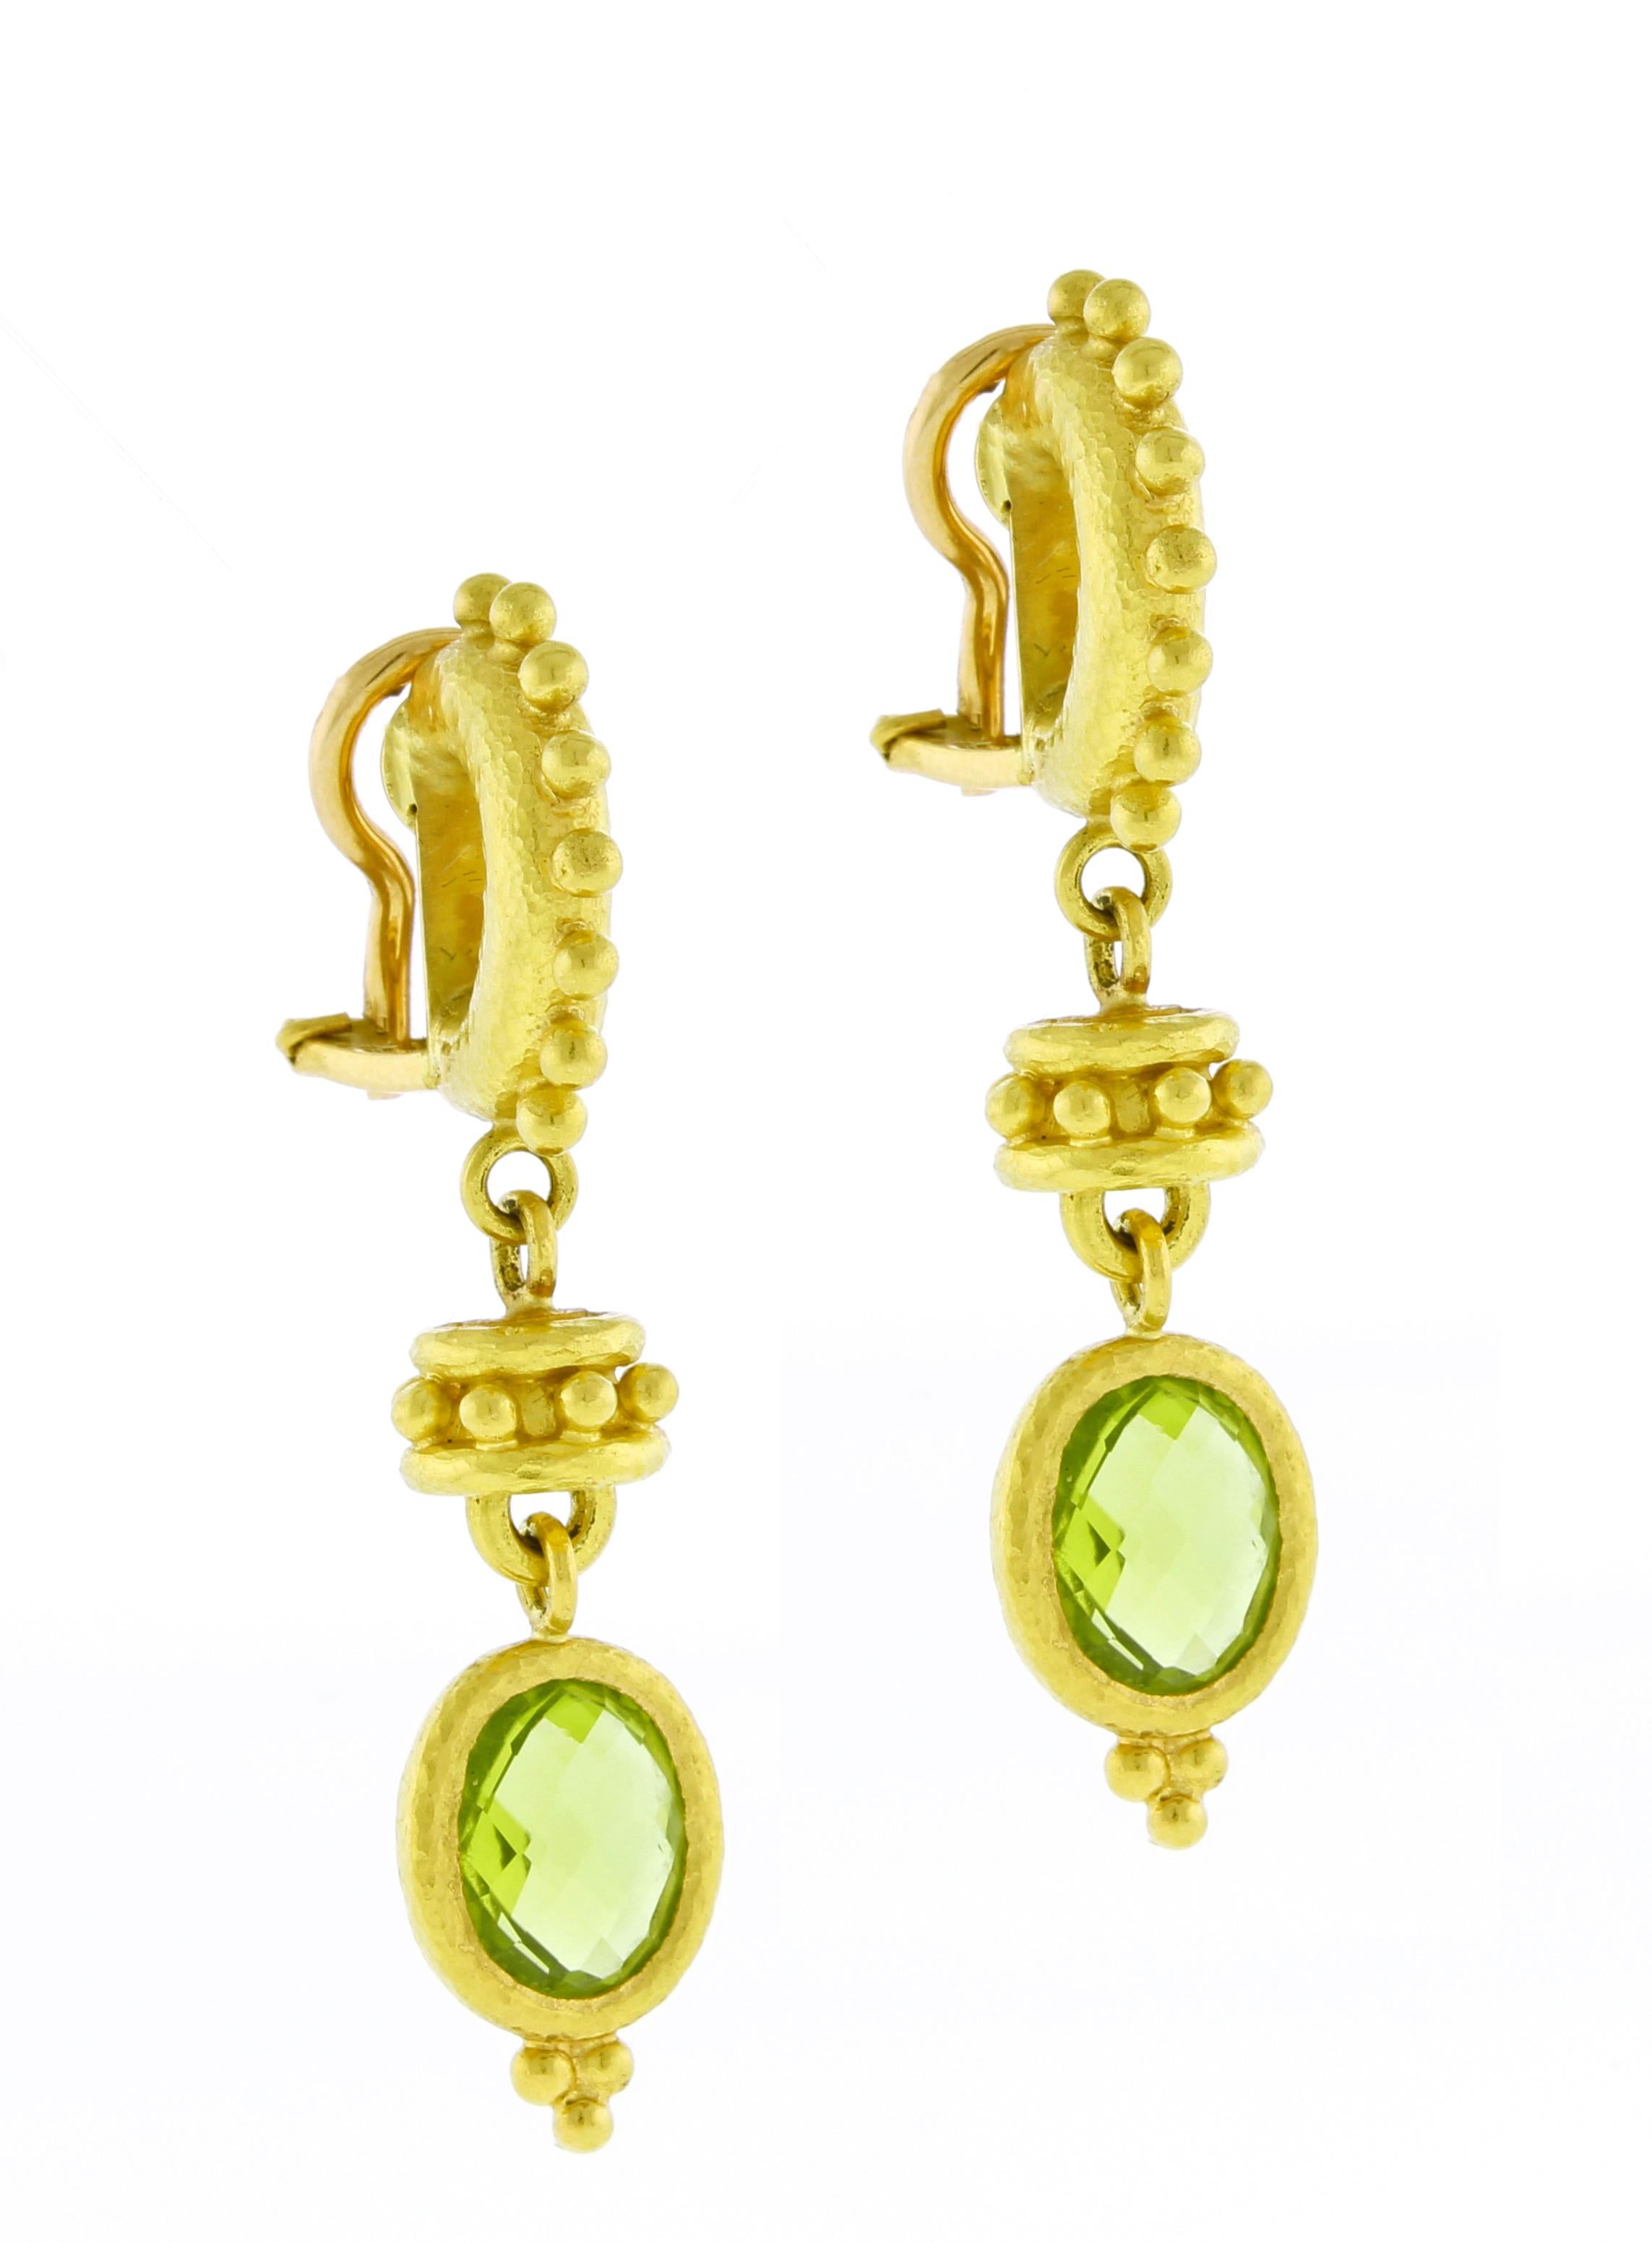 From Elizabeth Locke, her curved hoop earrings with large granulation and oval peridot drops.
♦ Designer: Elizabeth Locke
♦ Metal: 19 karat
♦ Gem stone: Peridot 9 X 7 mm 
♦ Circa 2010
♦ Size  1 5/8 inches
♦ Packaging: Pampillonia presentation box 
♦